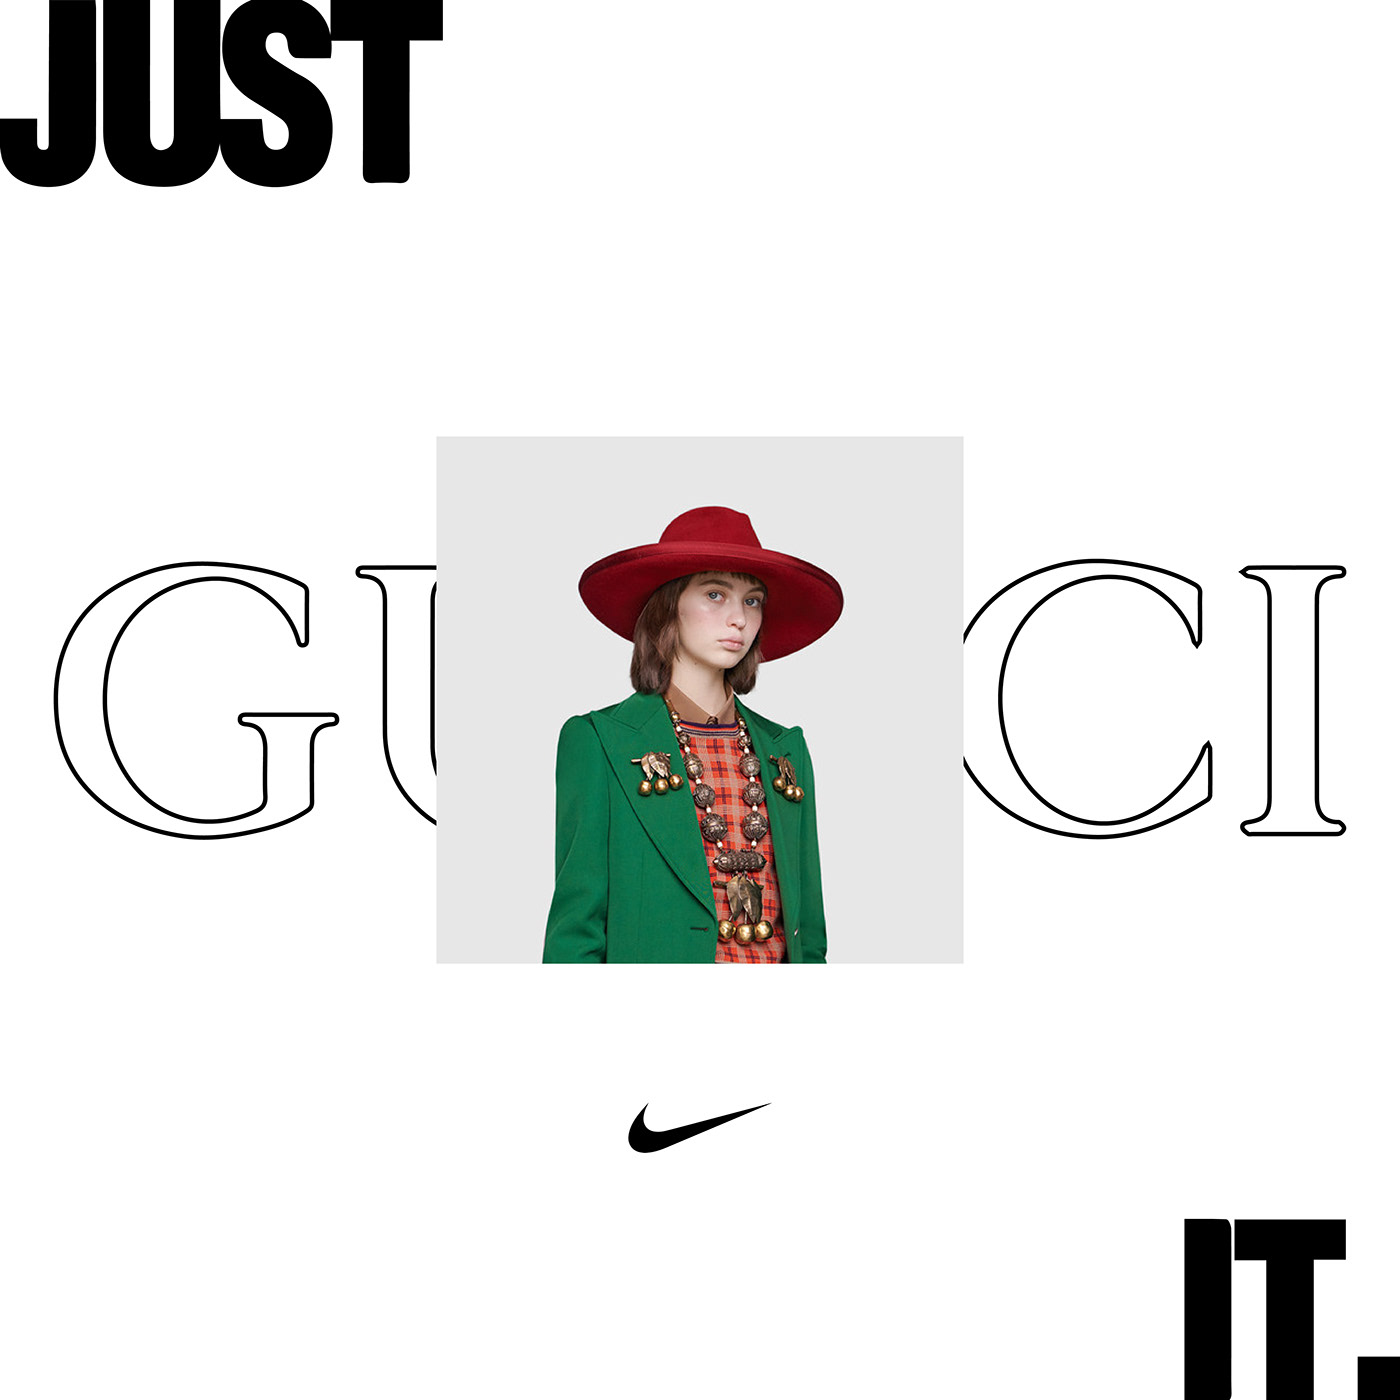 gucci poster Nike Fashion  graphicdesign graphism graphisme gif Mode affiche